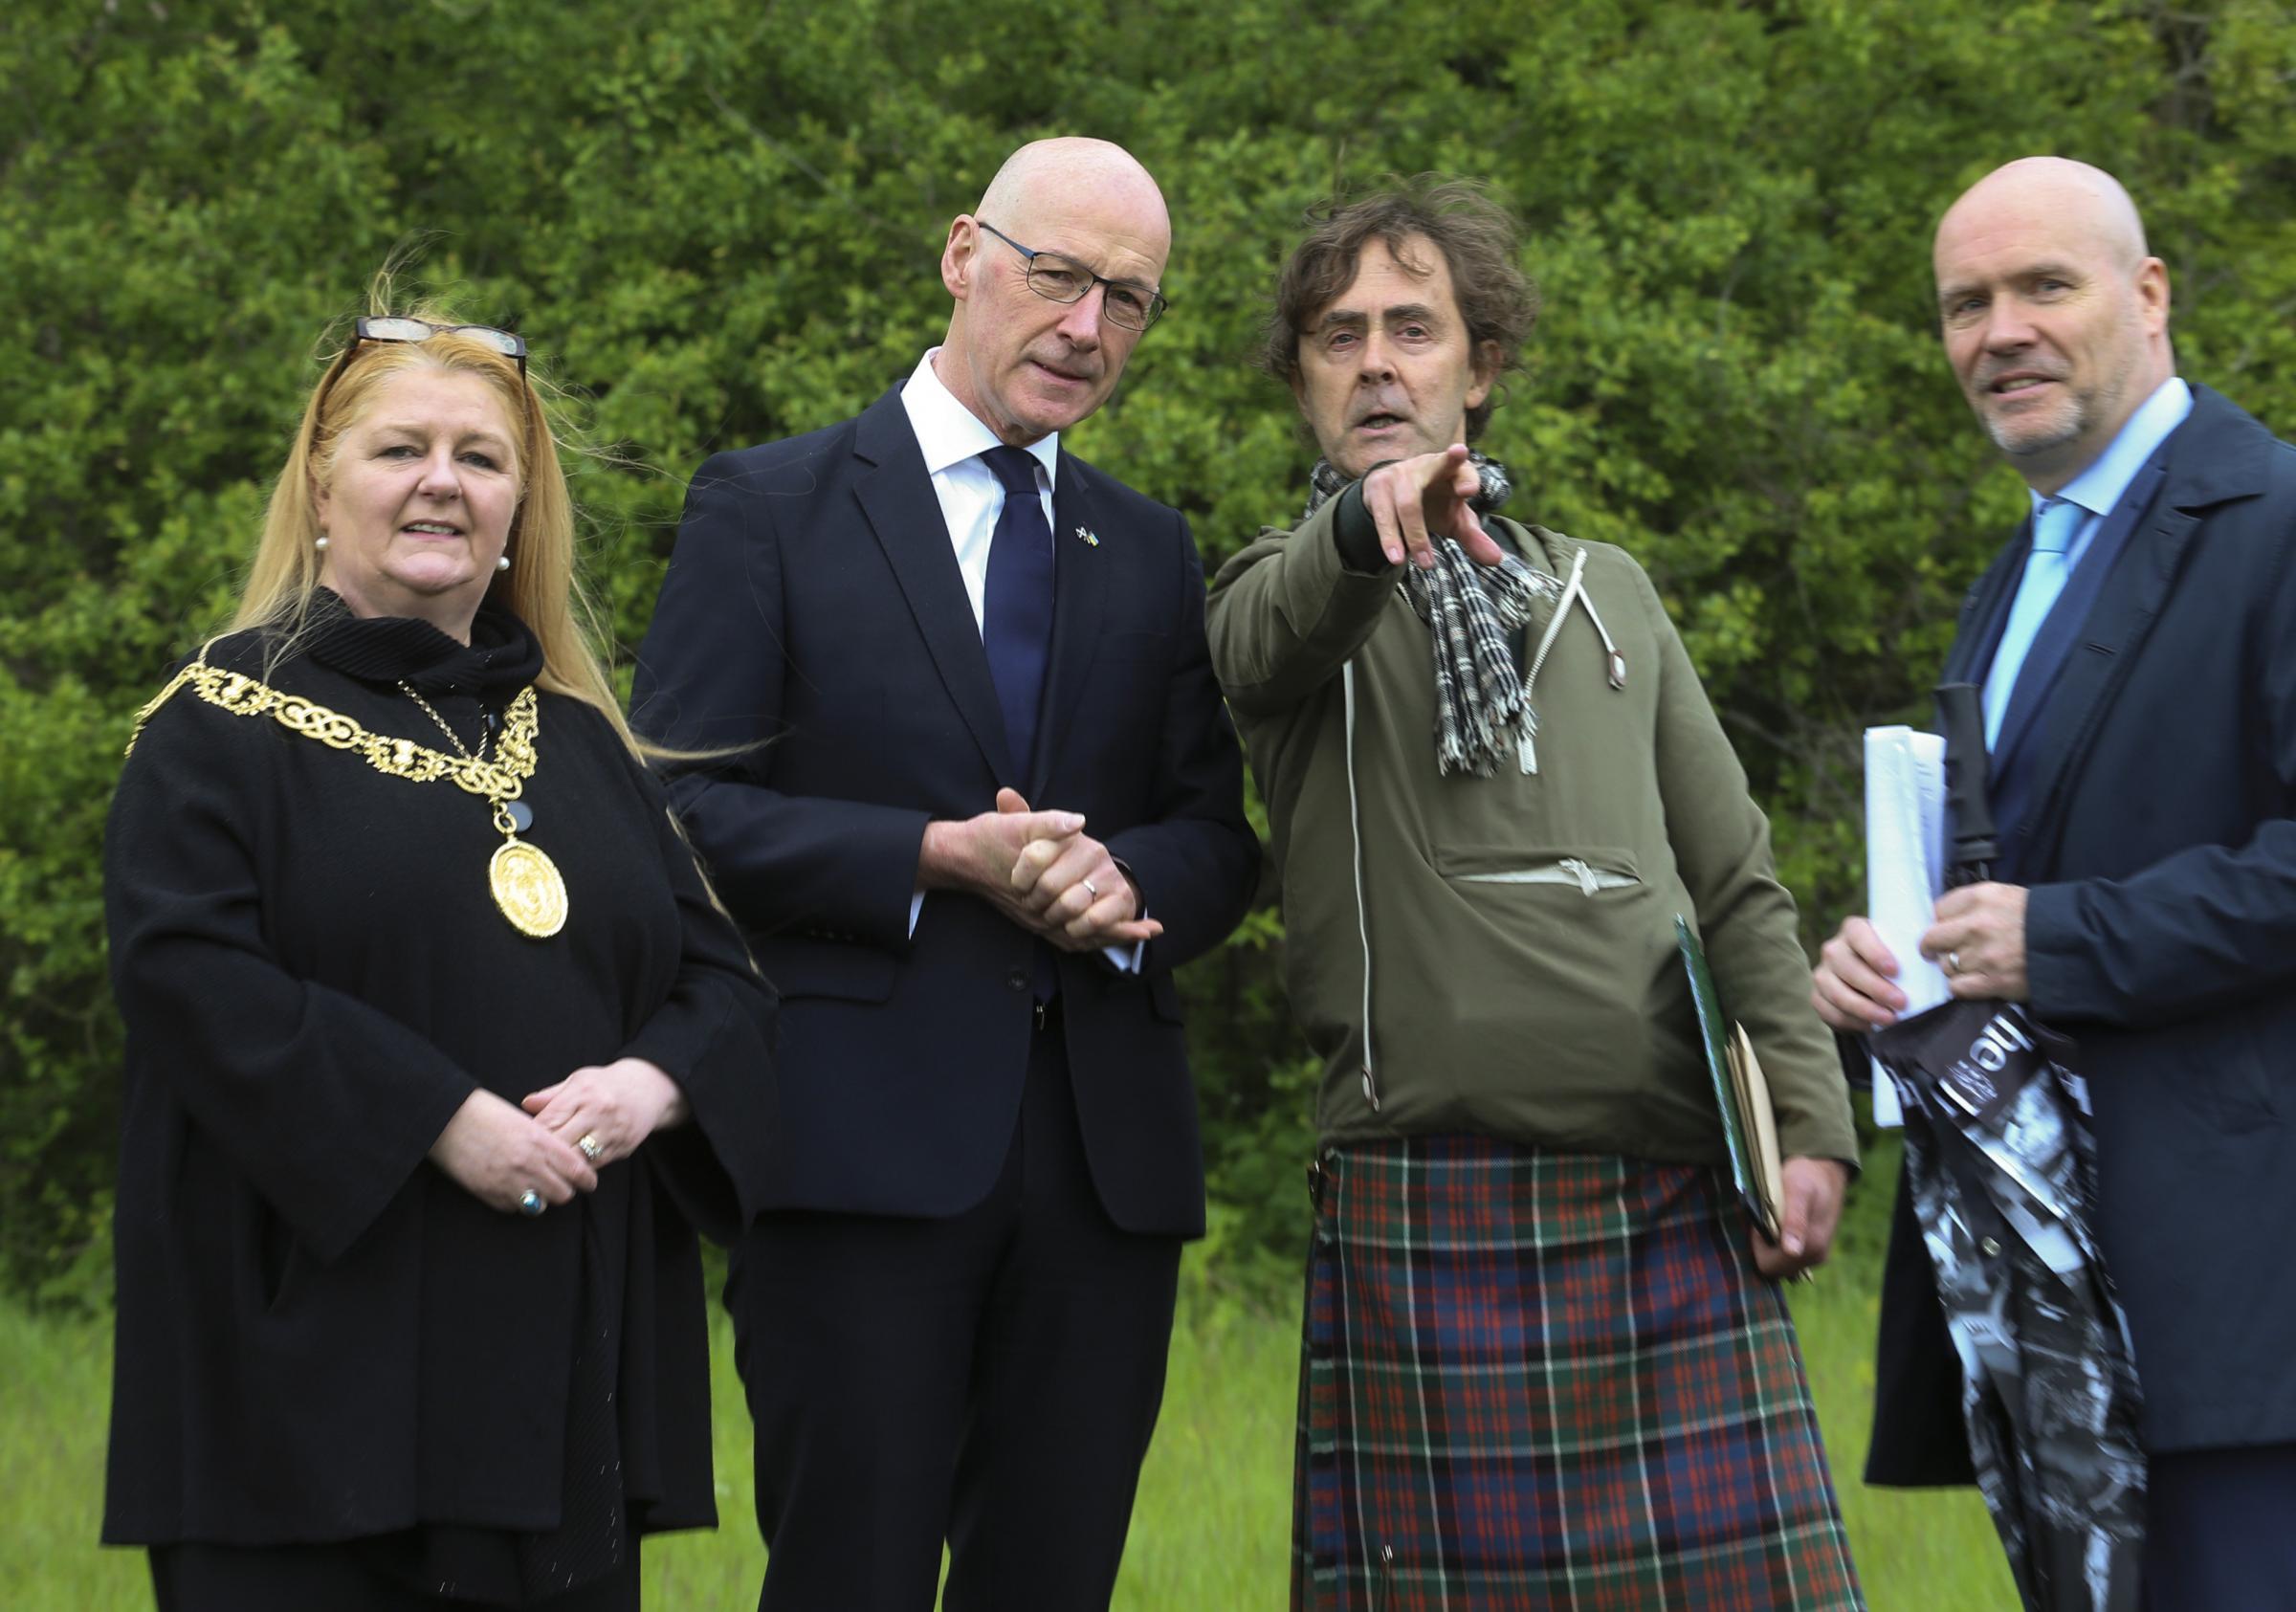 From left, Glasgows Lord Provost Jacqueline McLaren, Deputy First Minister John Swinney, artist Alec Findlay and Donald Martin, Editor of The Herald. 